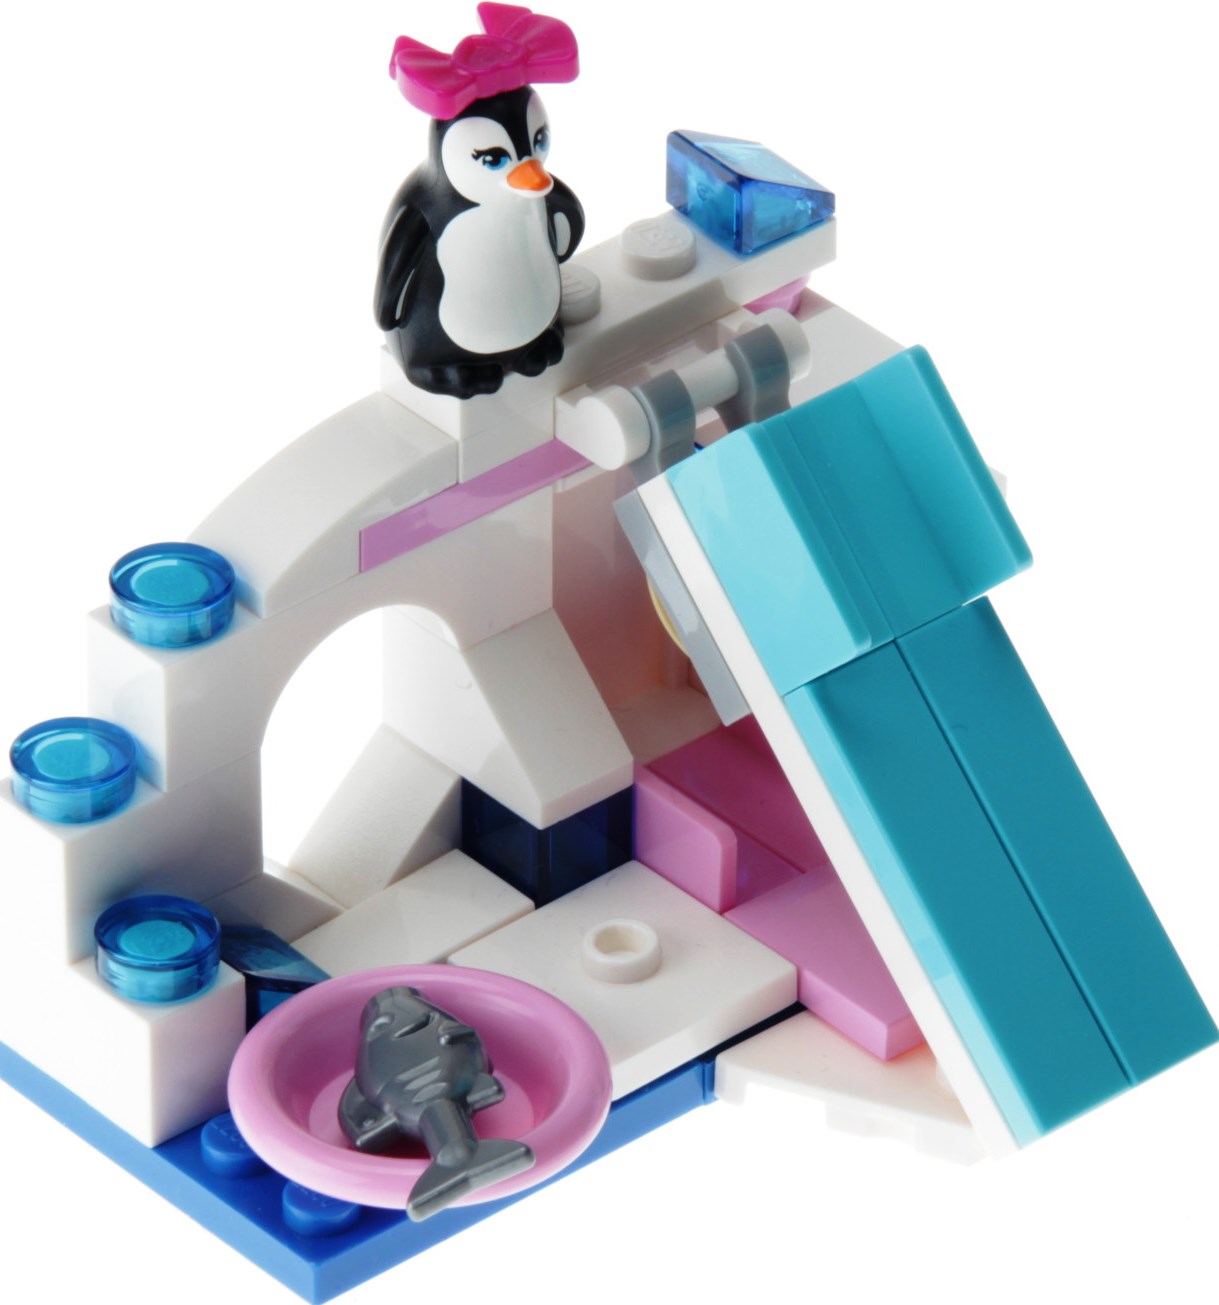 Factory Sealed! New LEGO Friends Penguin's Playground 41043 Series 4